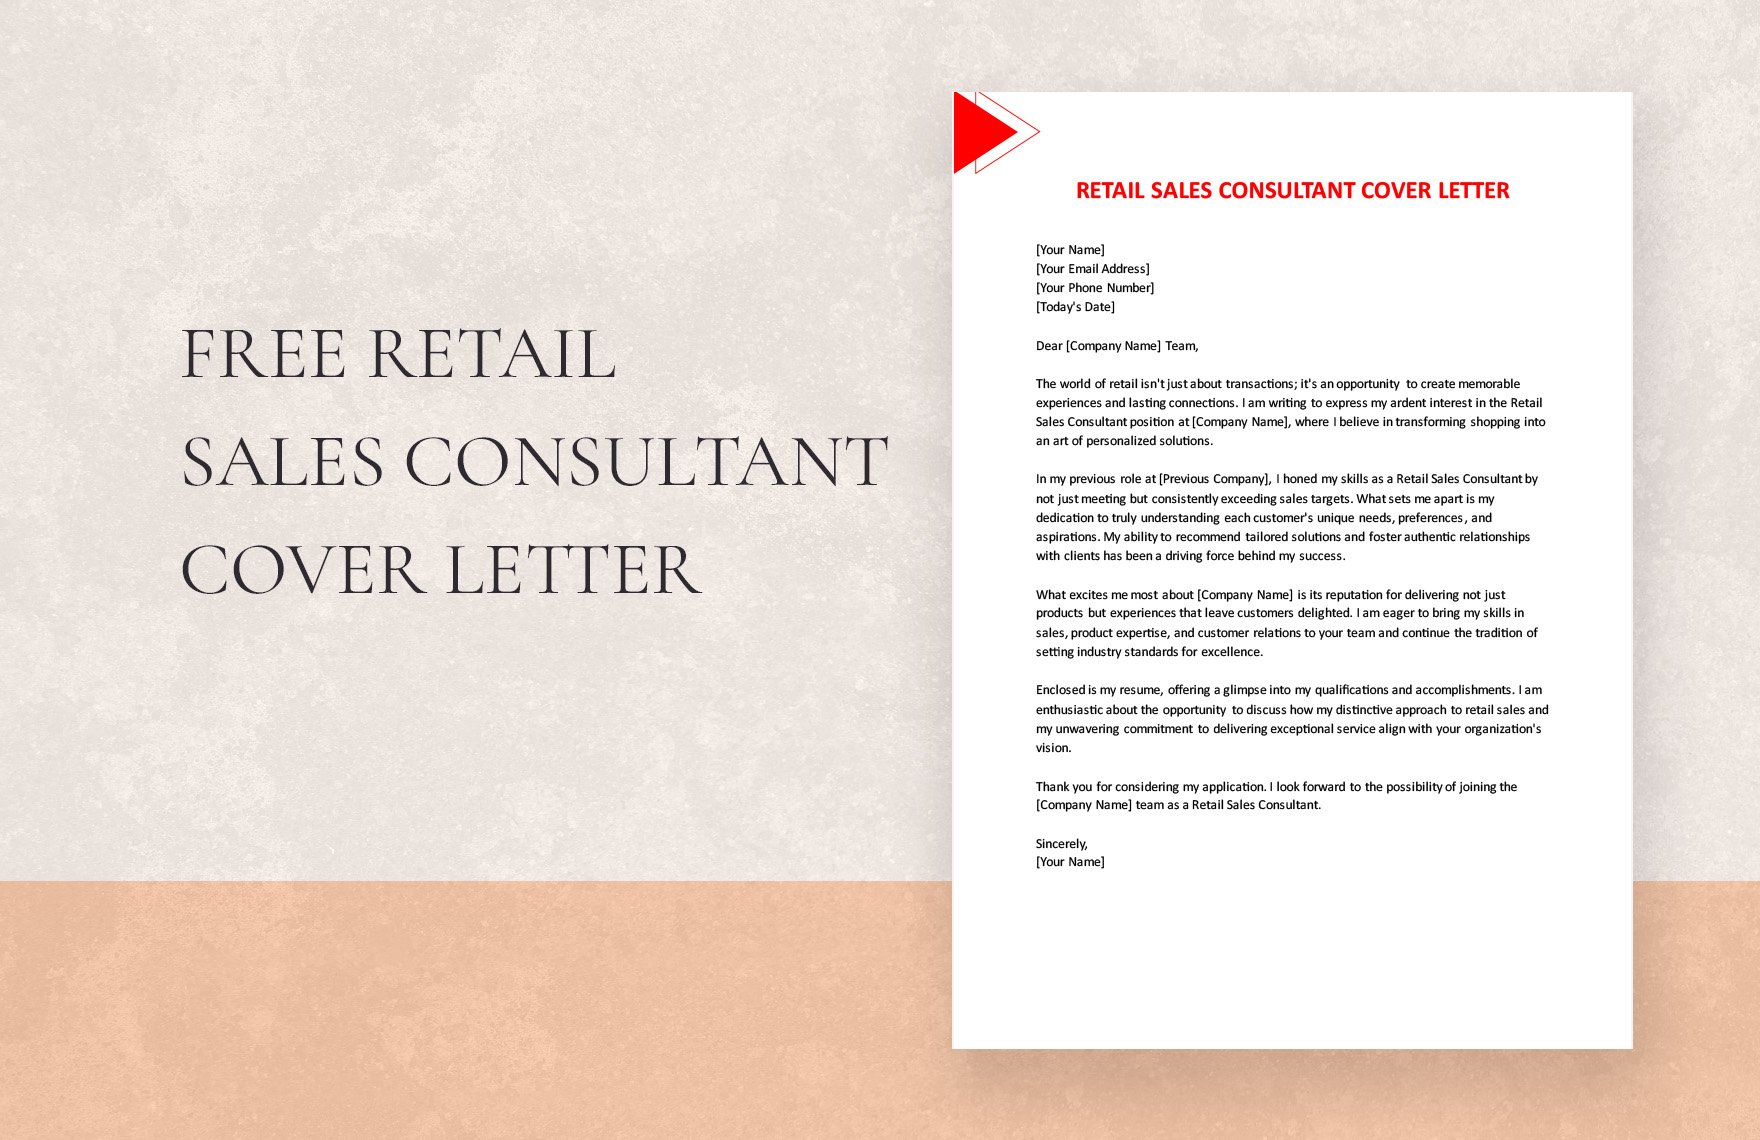 Retail Sales Consultant Cover Letter